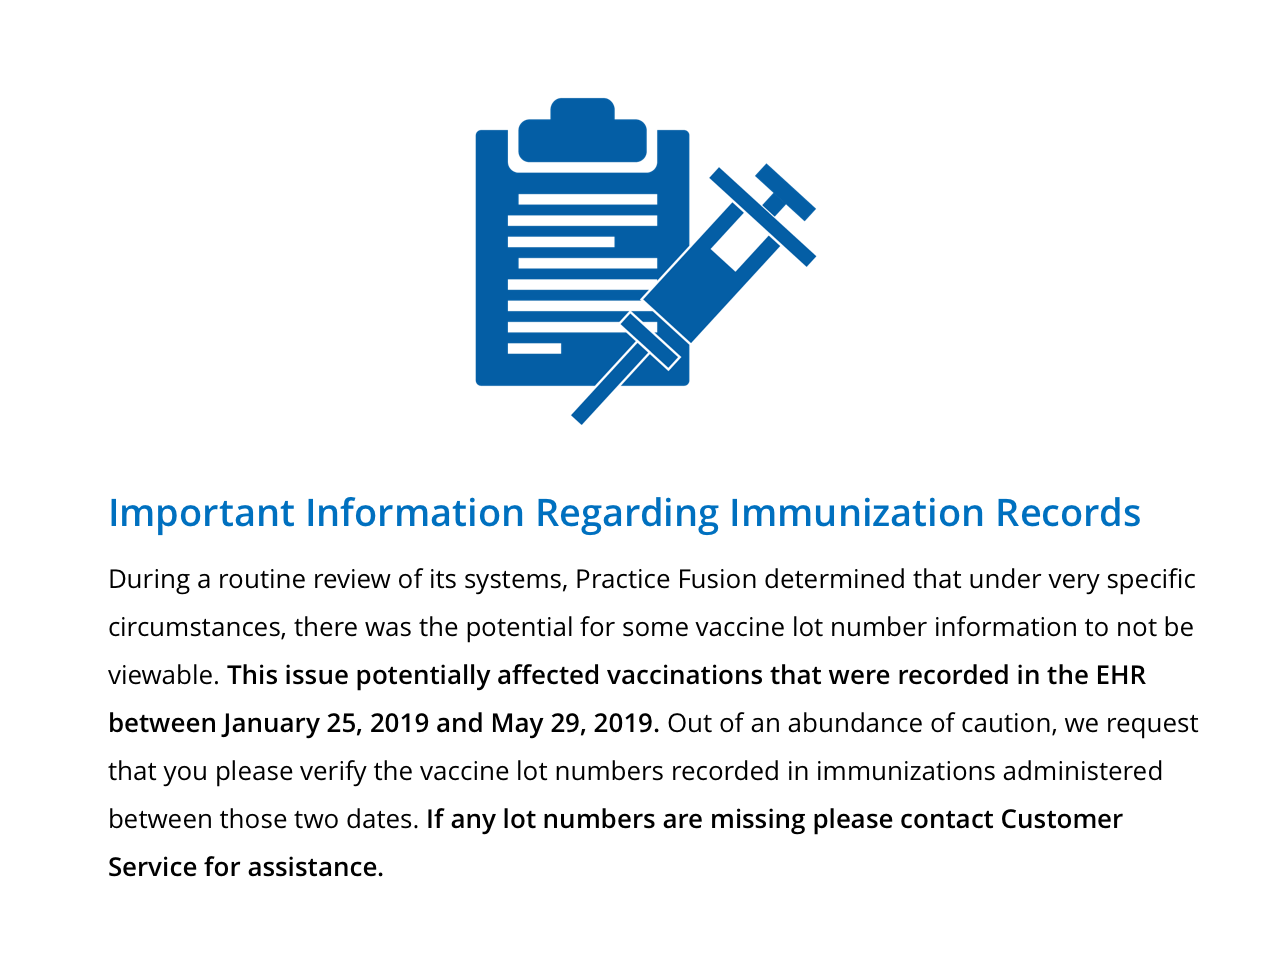 During a routine review of its systems, Practice Fusion determined that under very specific circumstances, there was the potential for some vaccine lot number information to not be viewable.